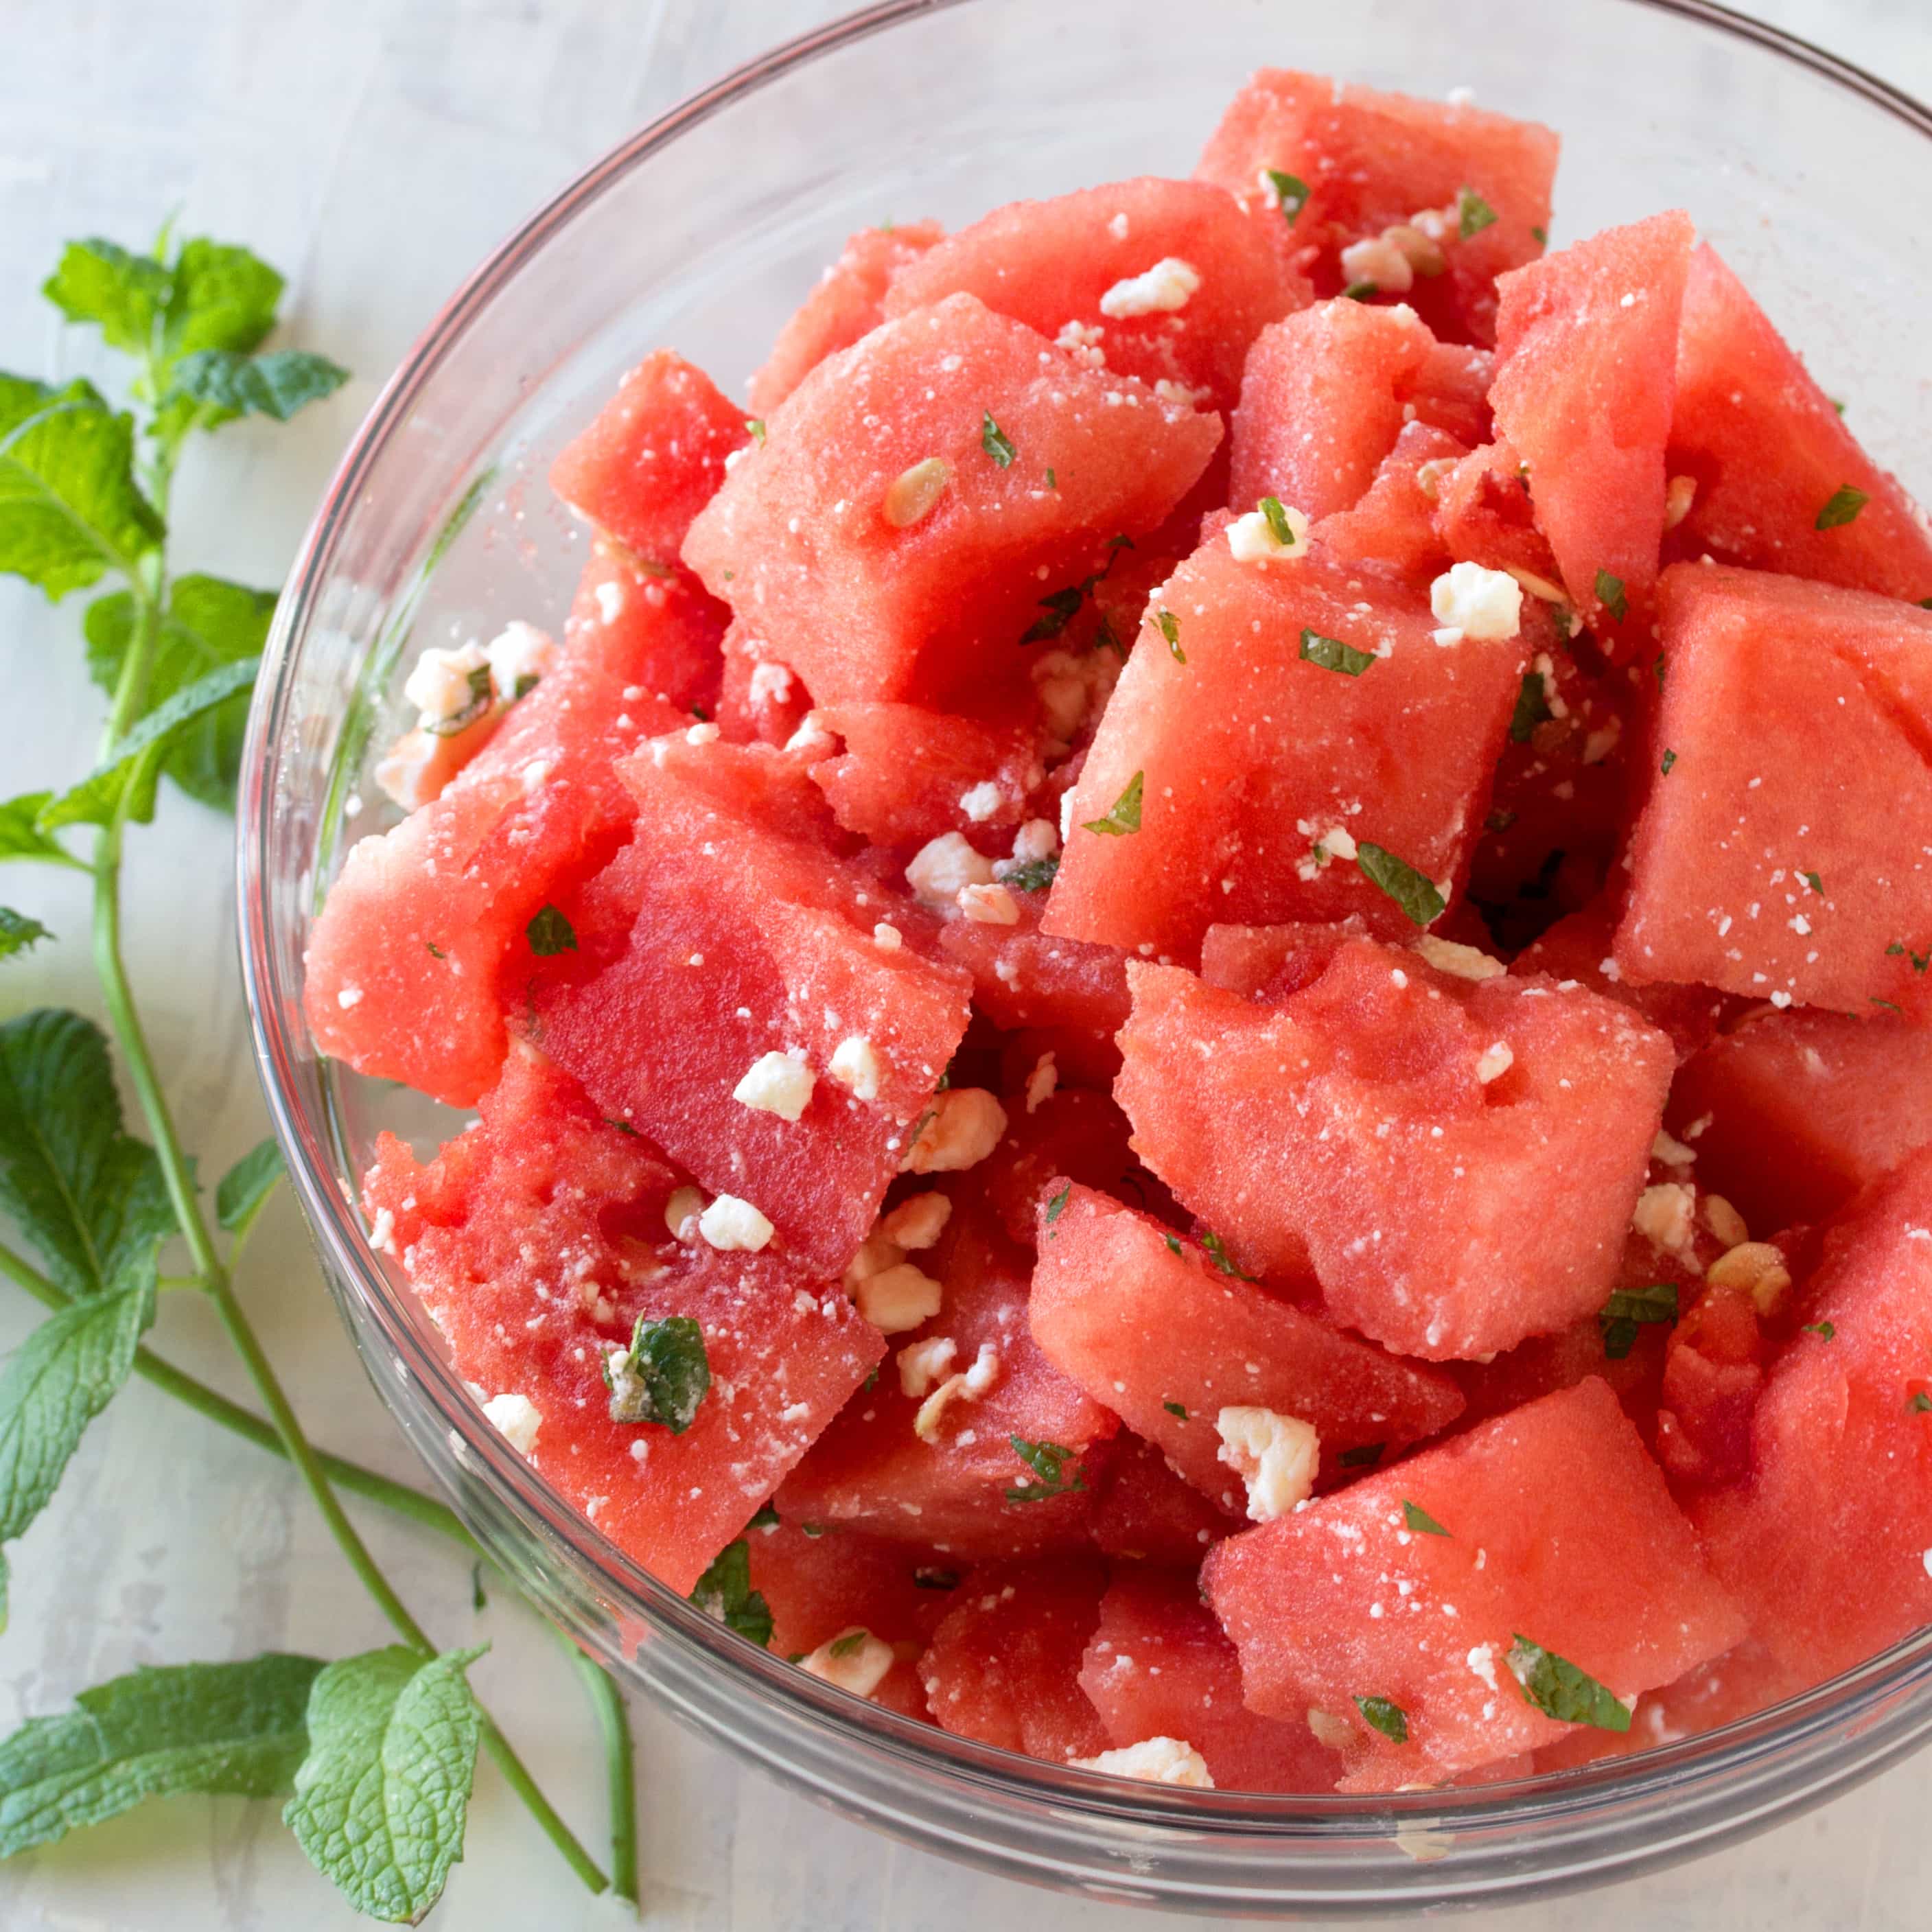 Watermelon Feta Salad served in a glass bowl surrounded by sprigs of fresh mint